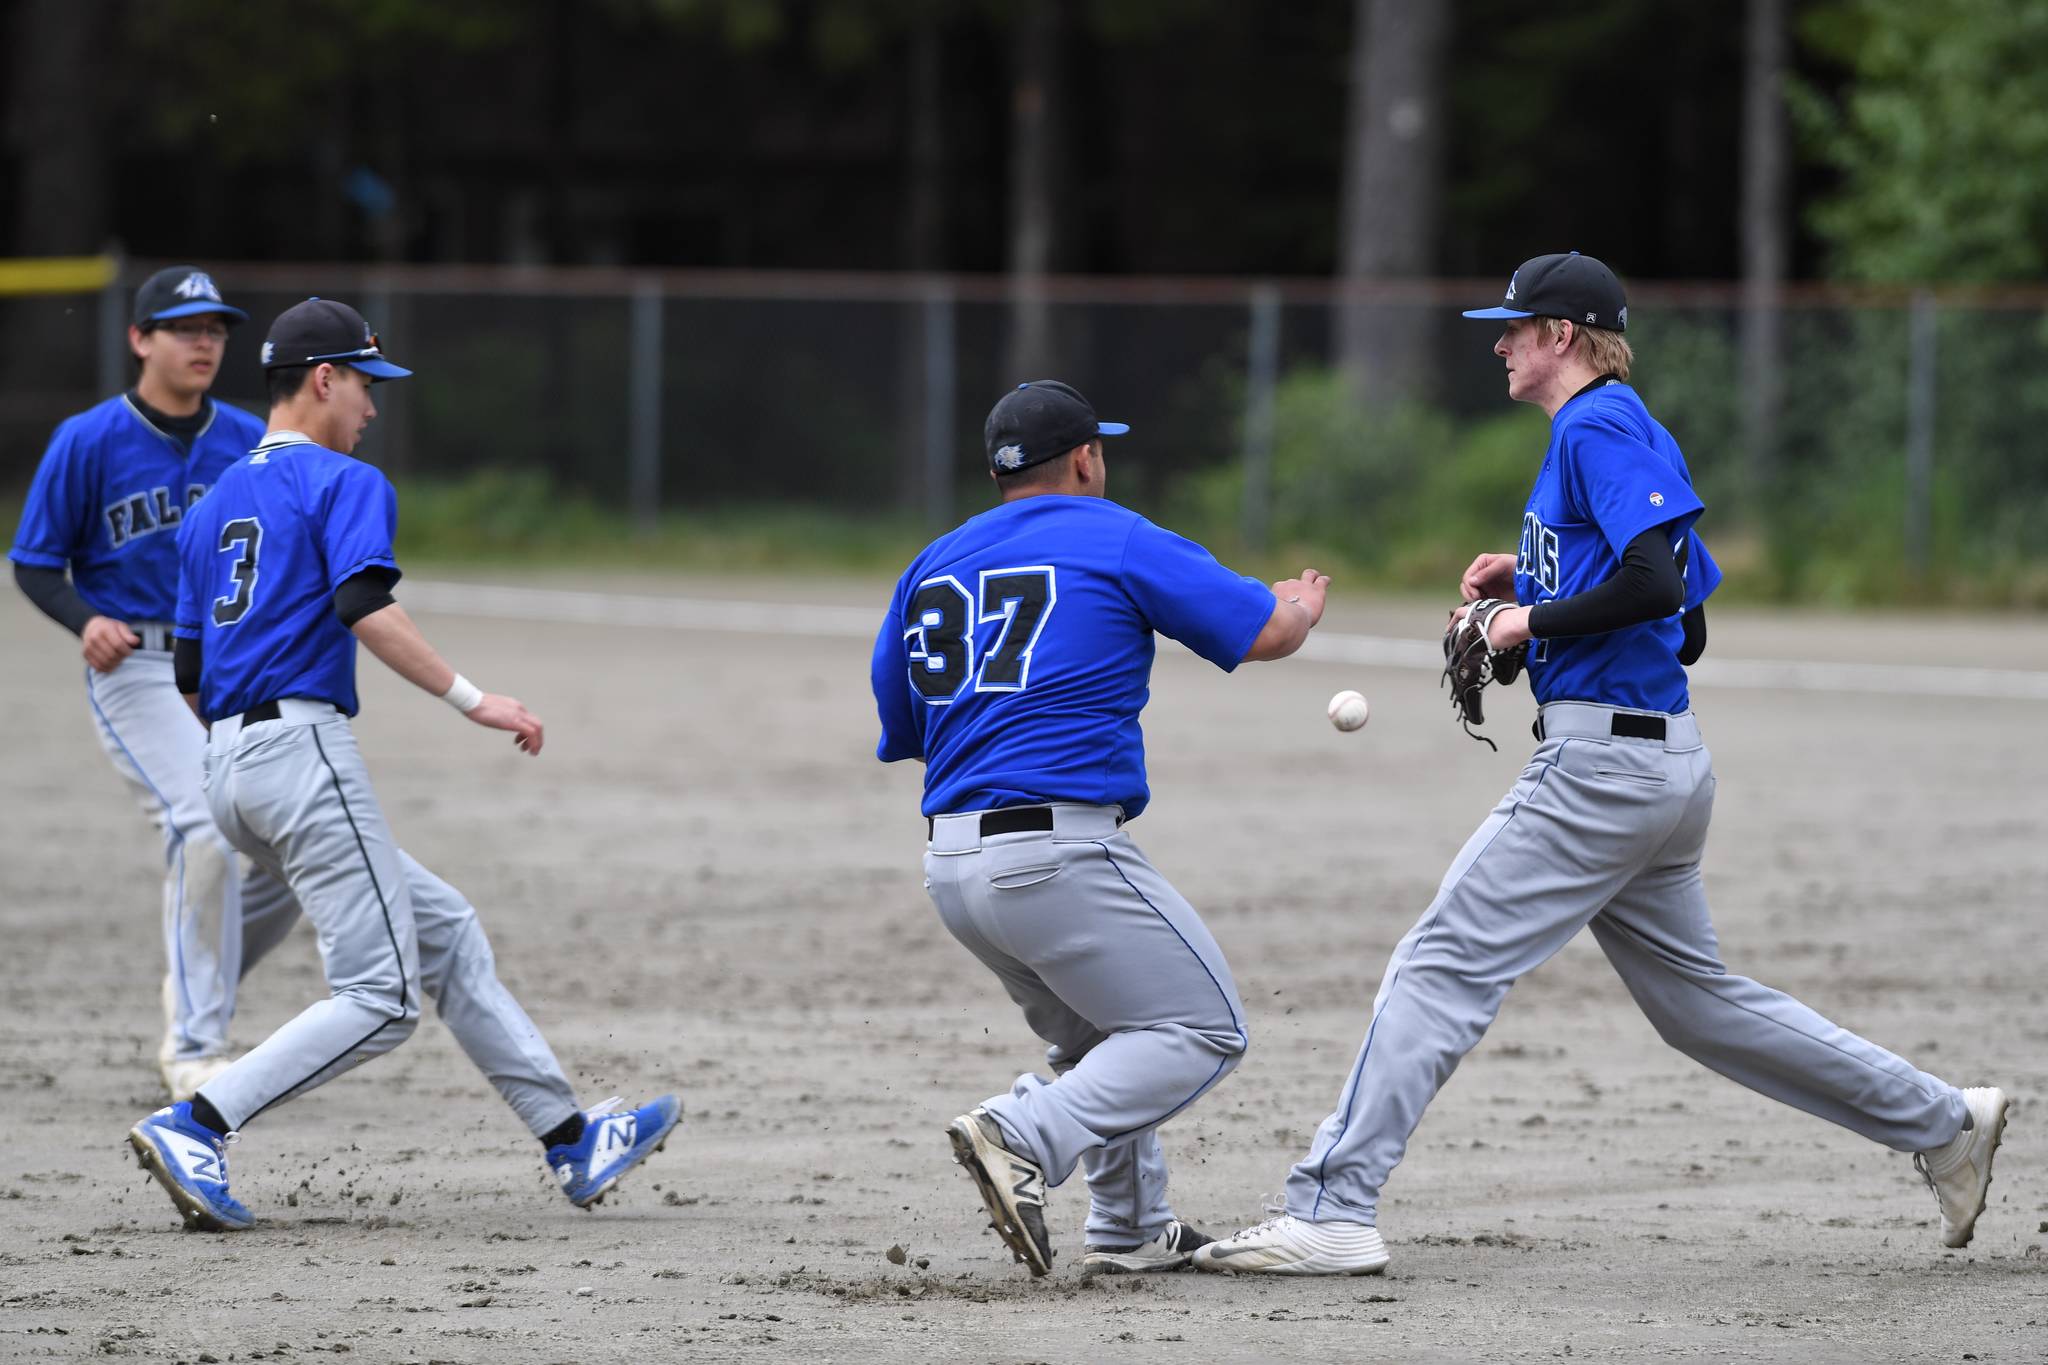 A pop-up drops between Thunder Mountain infielders during the Region V Baseball Championship at Adair-Kennedy Memorial Park on Friday, May 24, 2019. (Michael Penn | Juneau Empire)